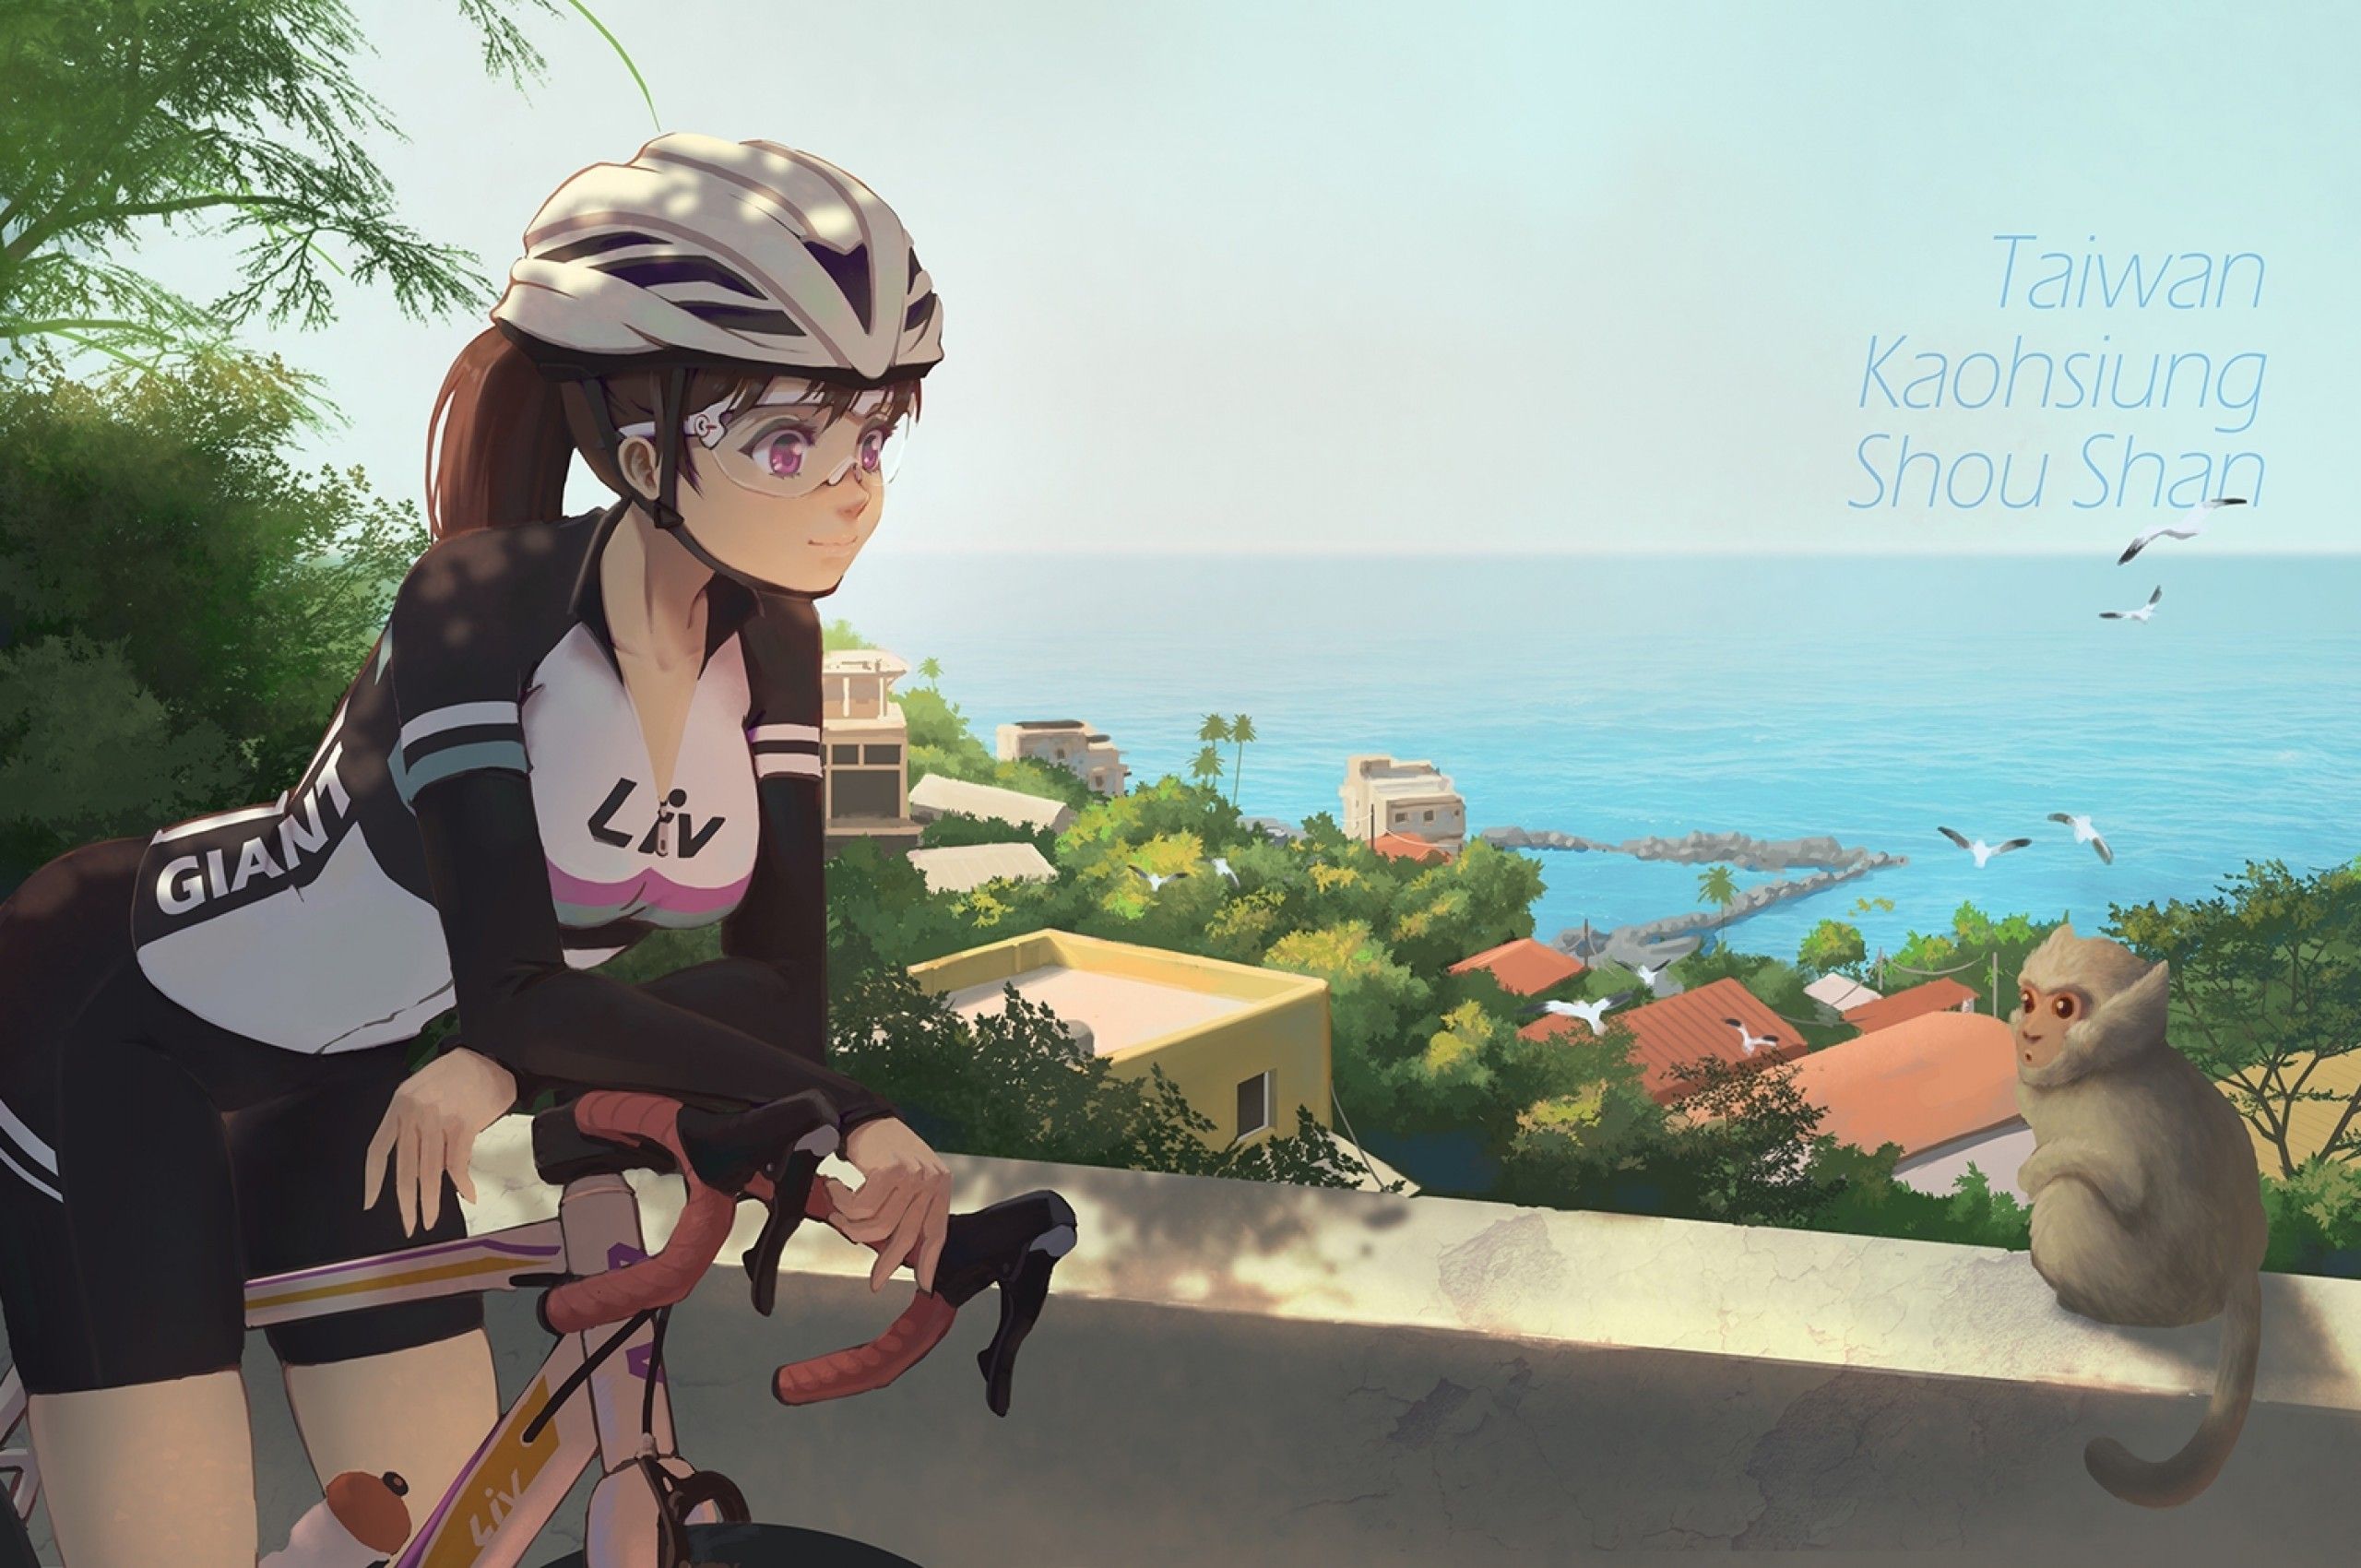 Download 2560x1700 Anime Girl, Bicycle .wallpapermaiden.com